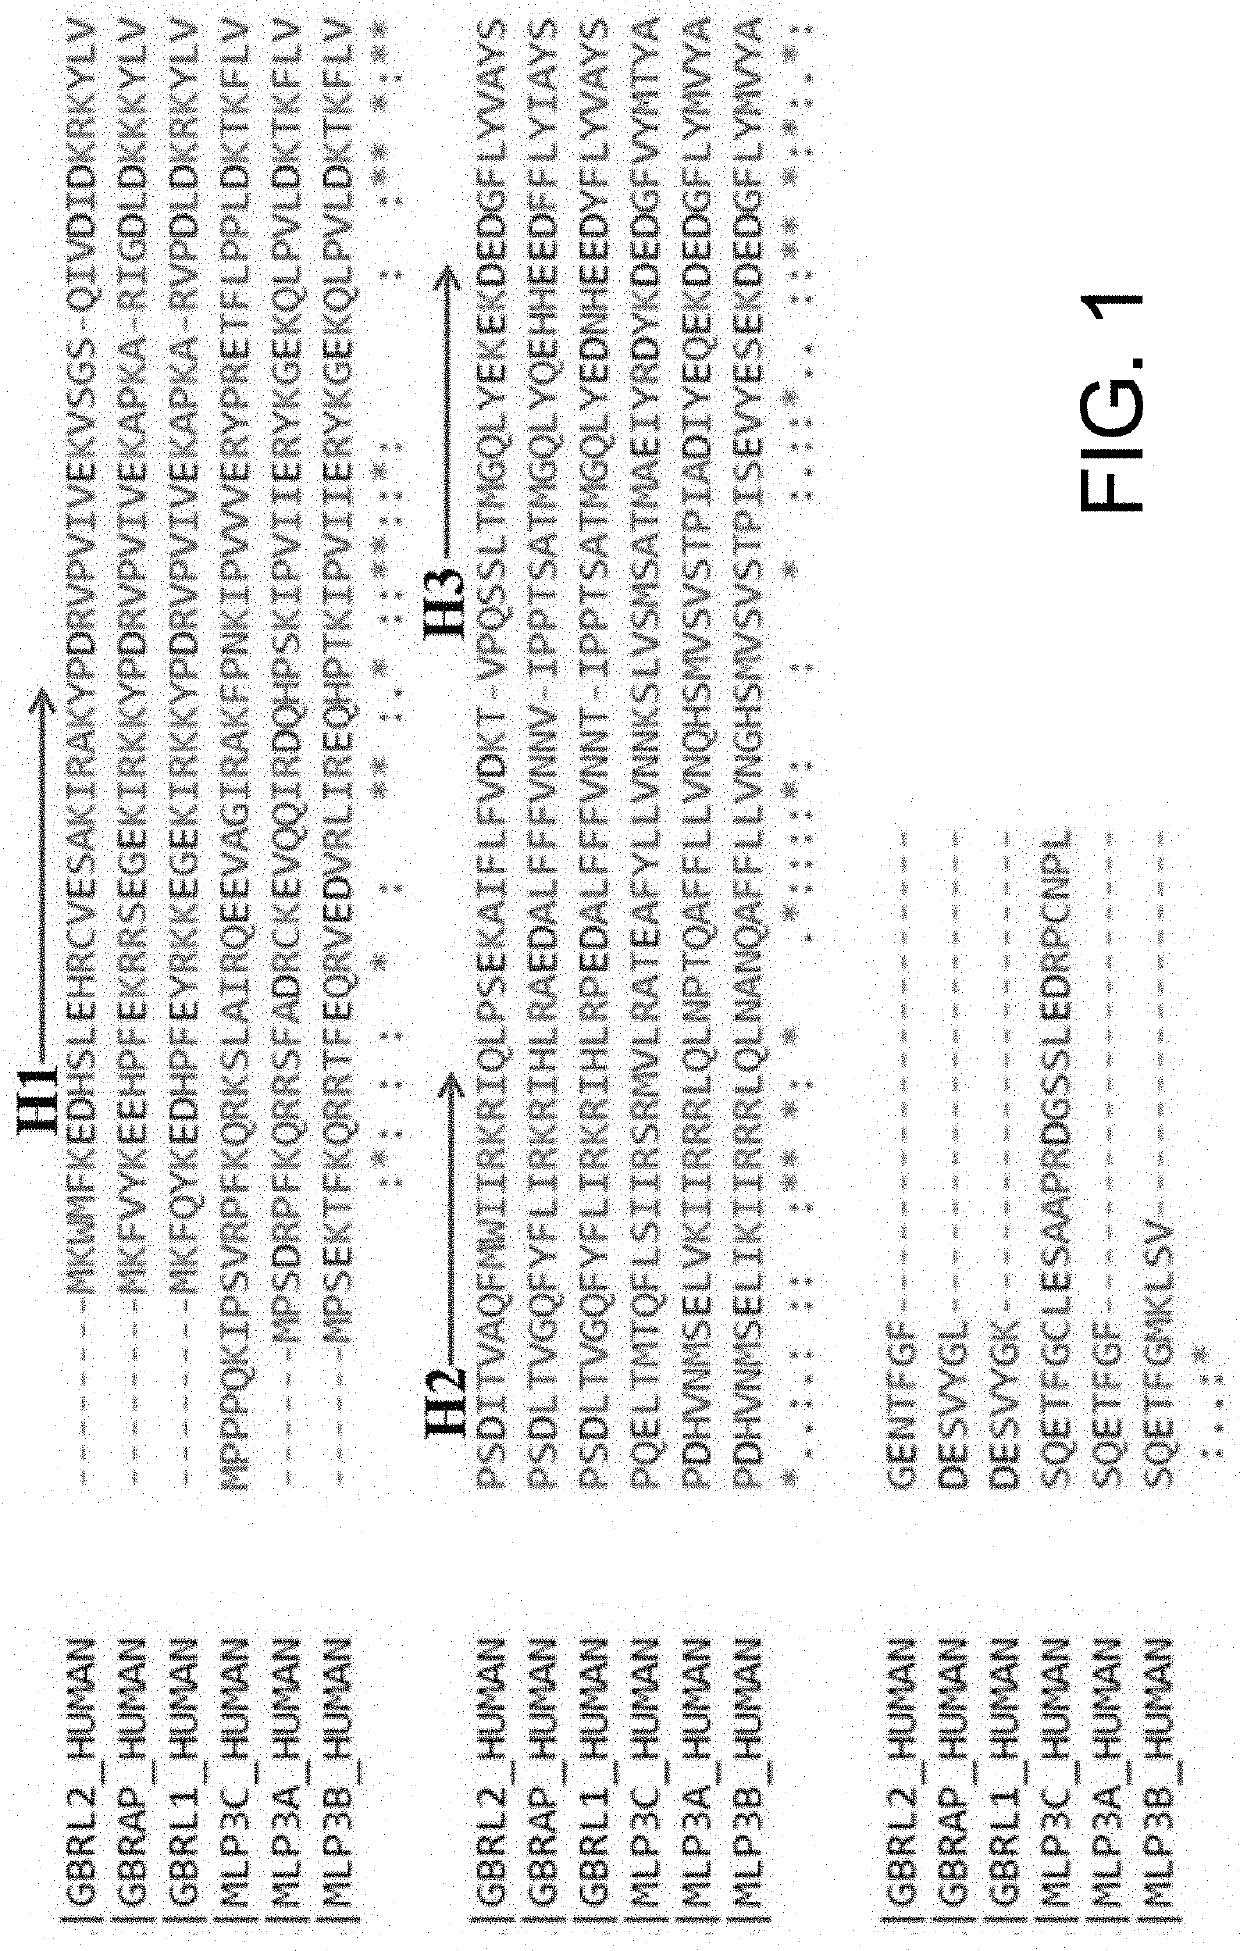 Isolated peptide, Anti-cancer medicinal composition including the same and method of specifically reducing or inhibiting activities of cancer cells using the same